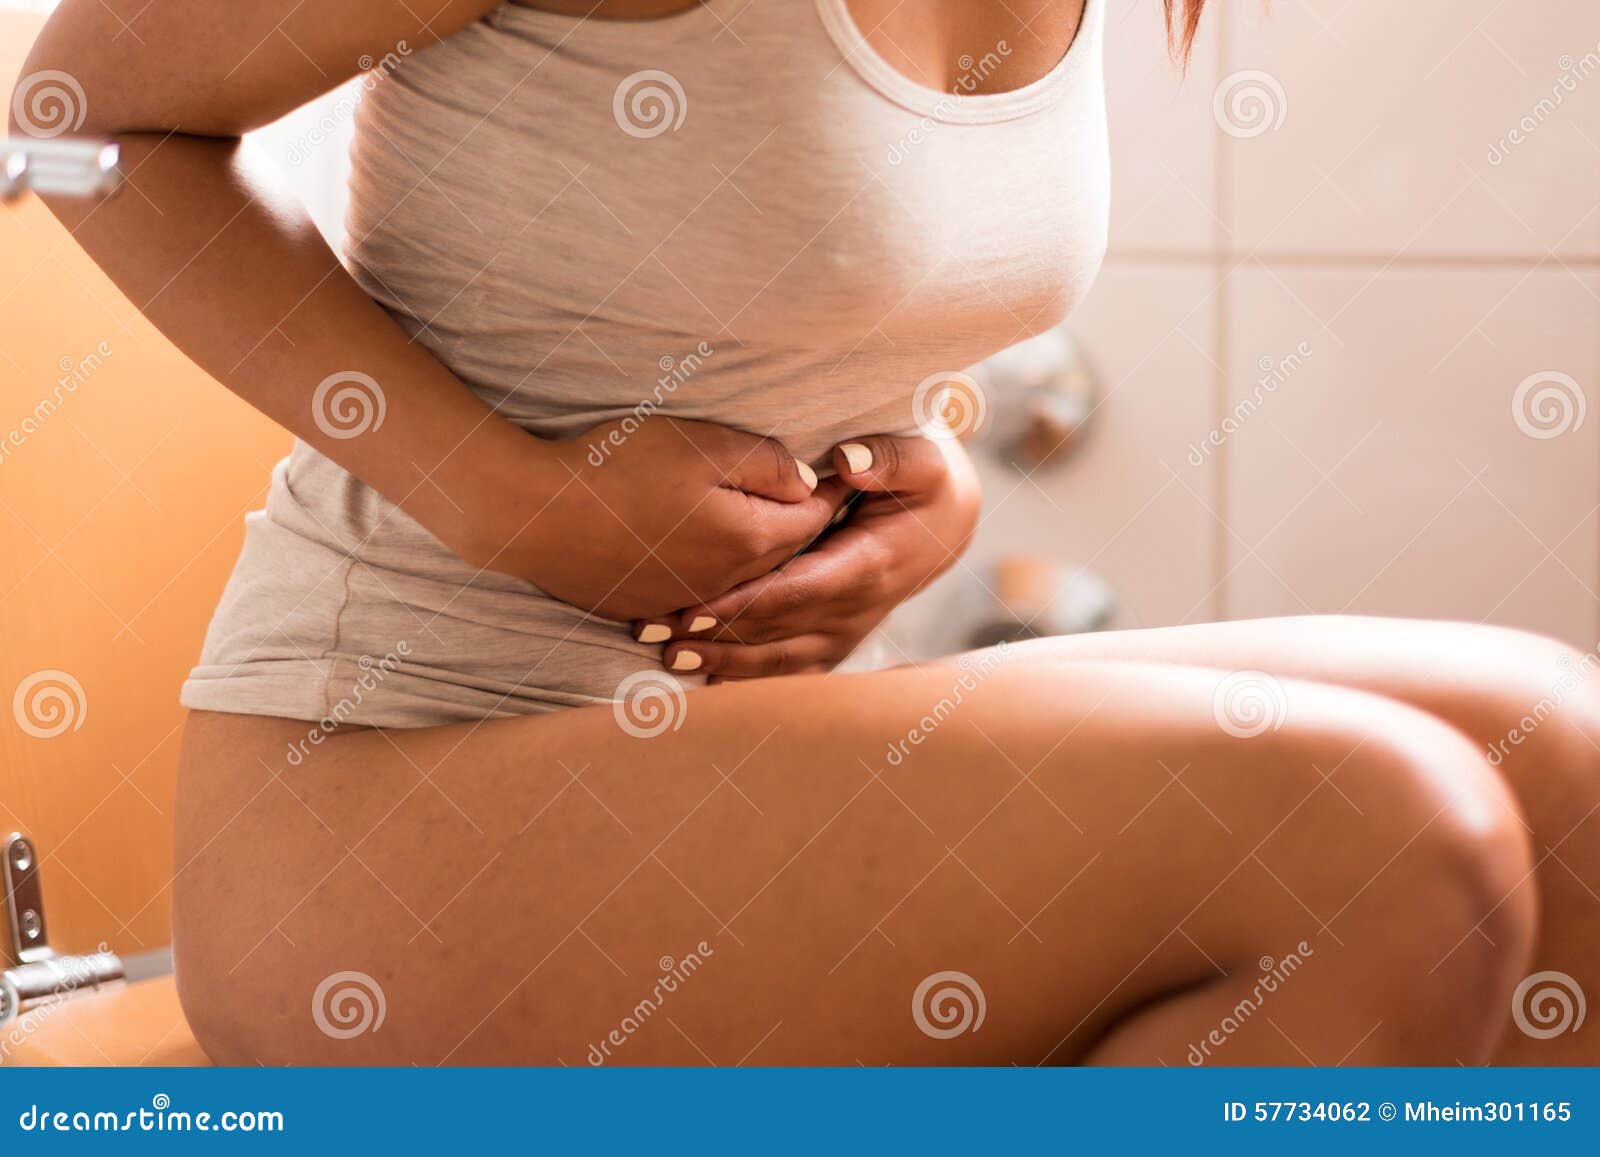 Human Stomach Images & Stock Pictures ... - 123RF Stock Photos